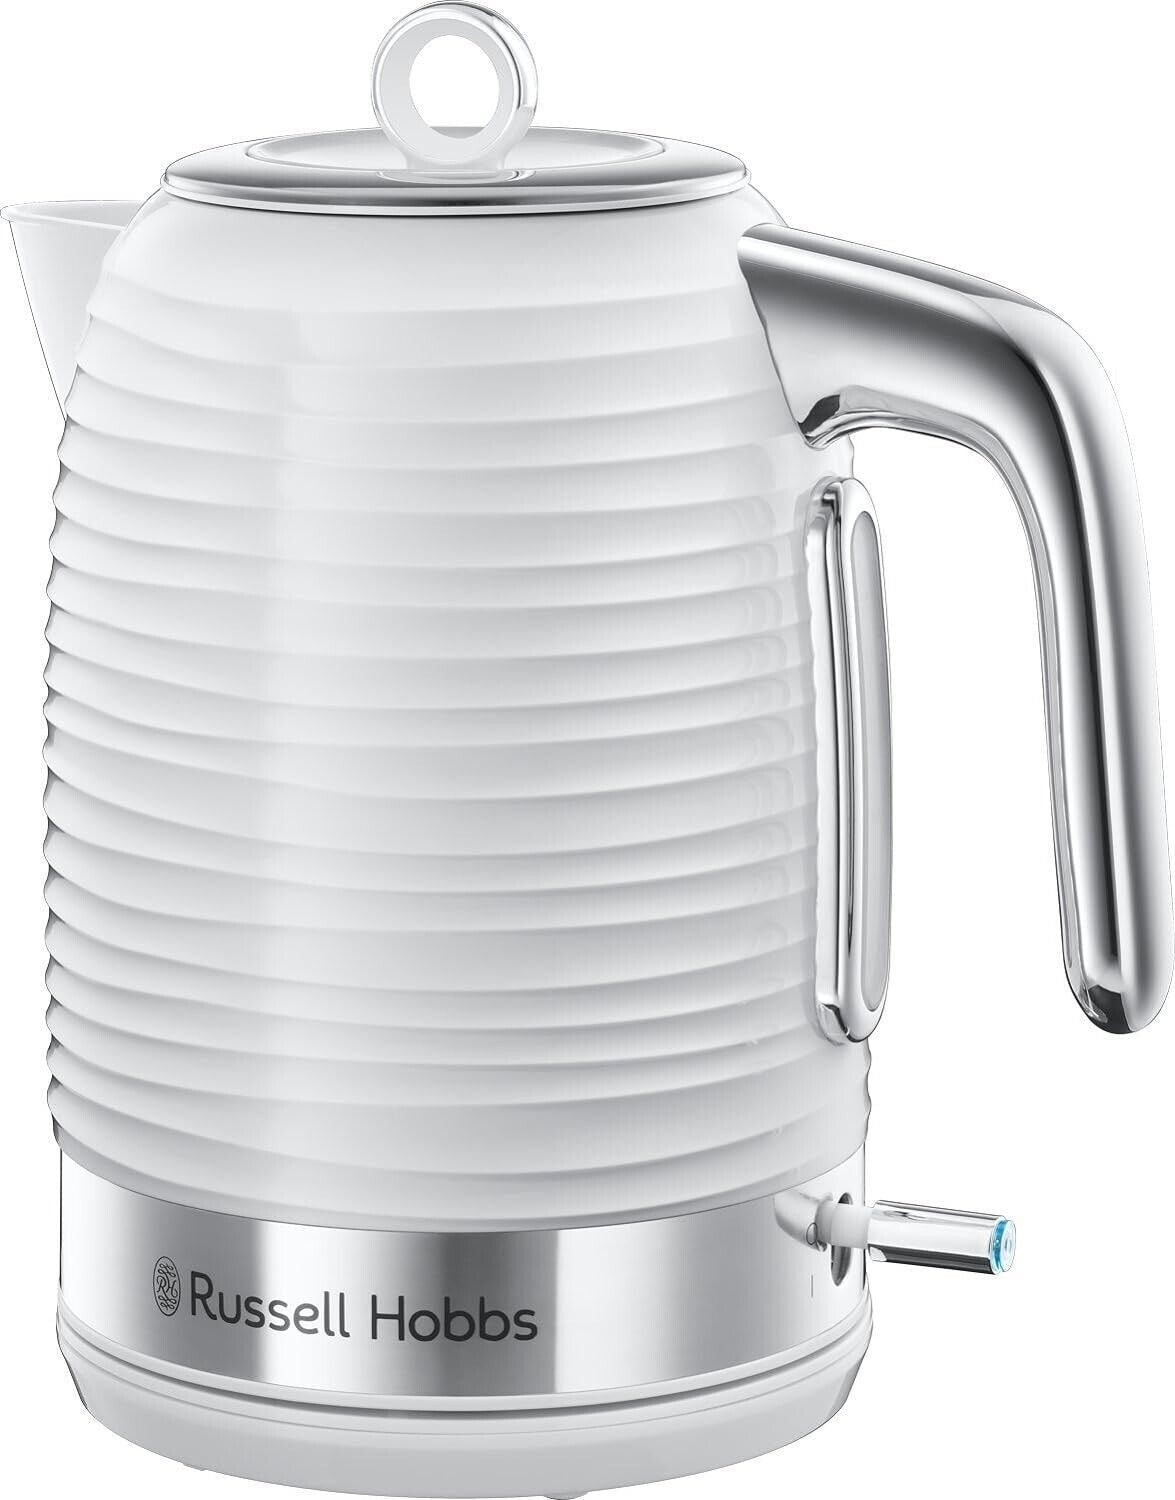 Russell Hobbs Inspire 1.7L 3KW Jug Kettle in White & Chrome 24360